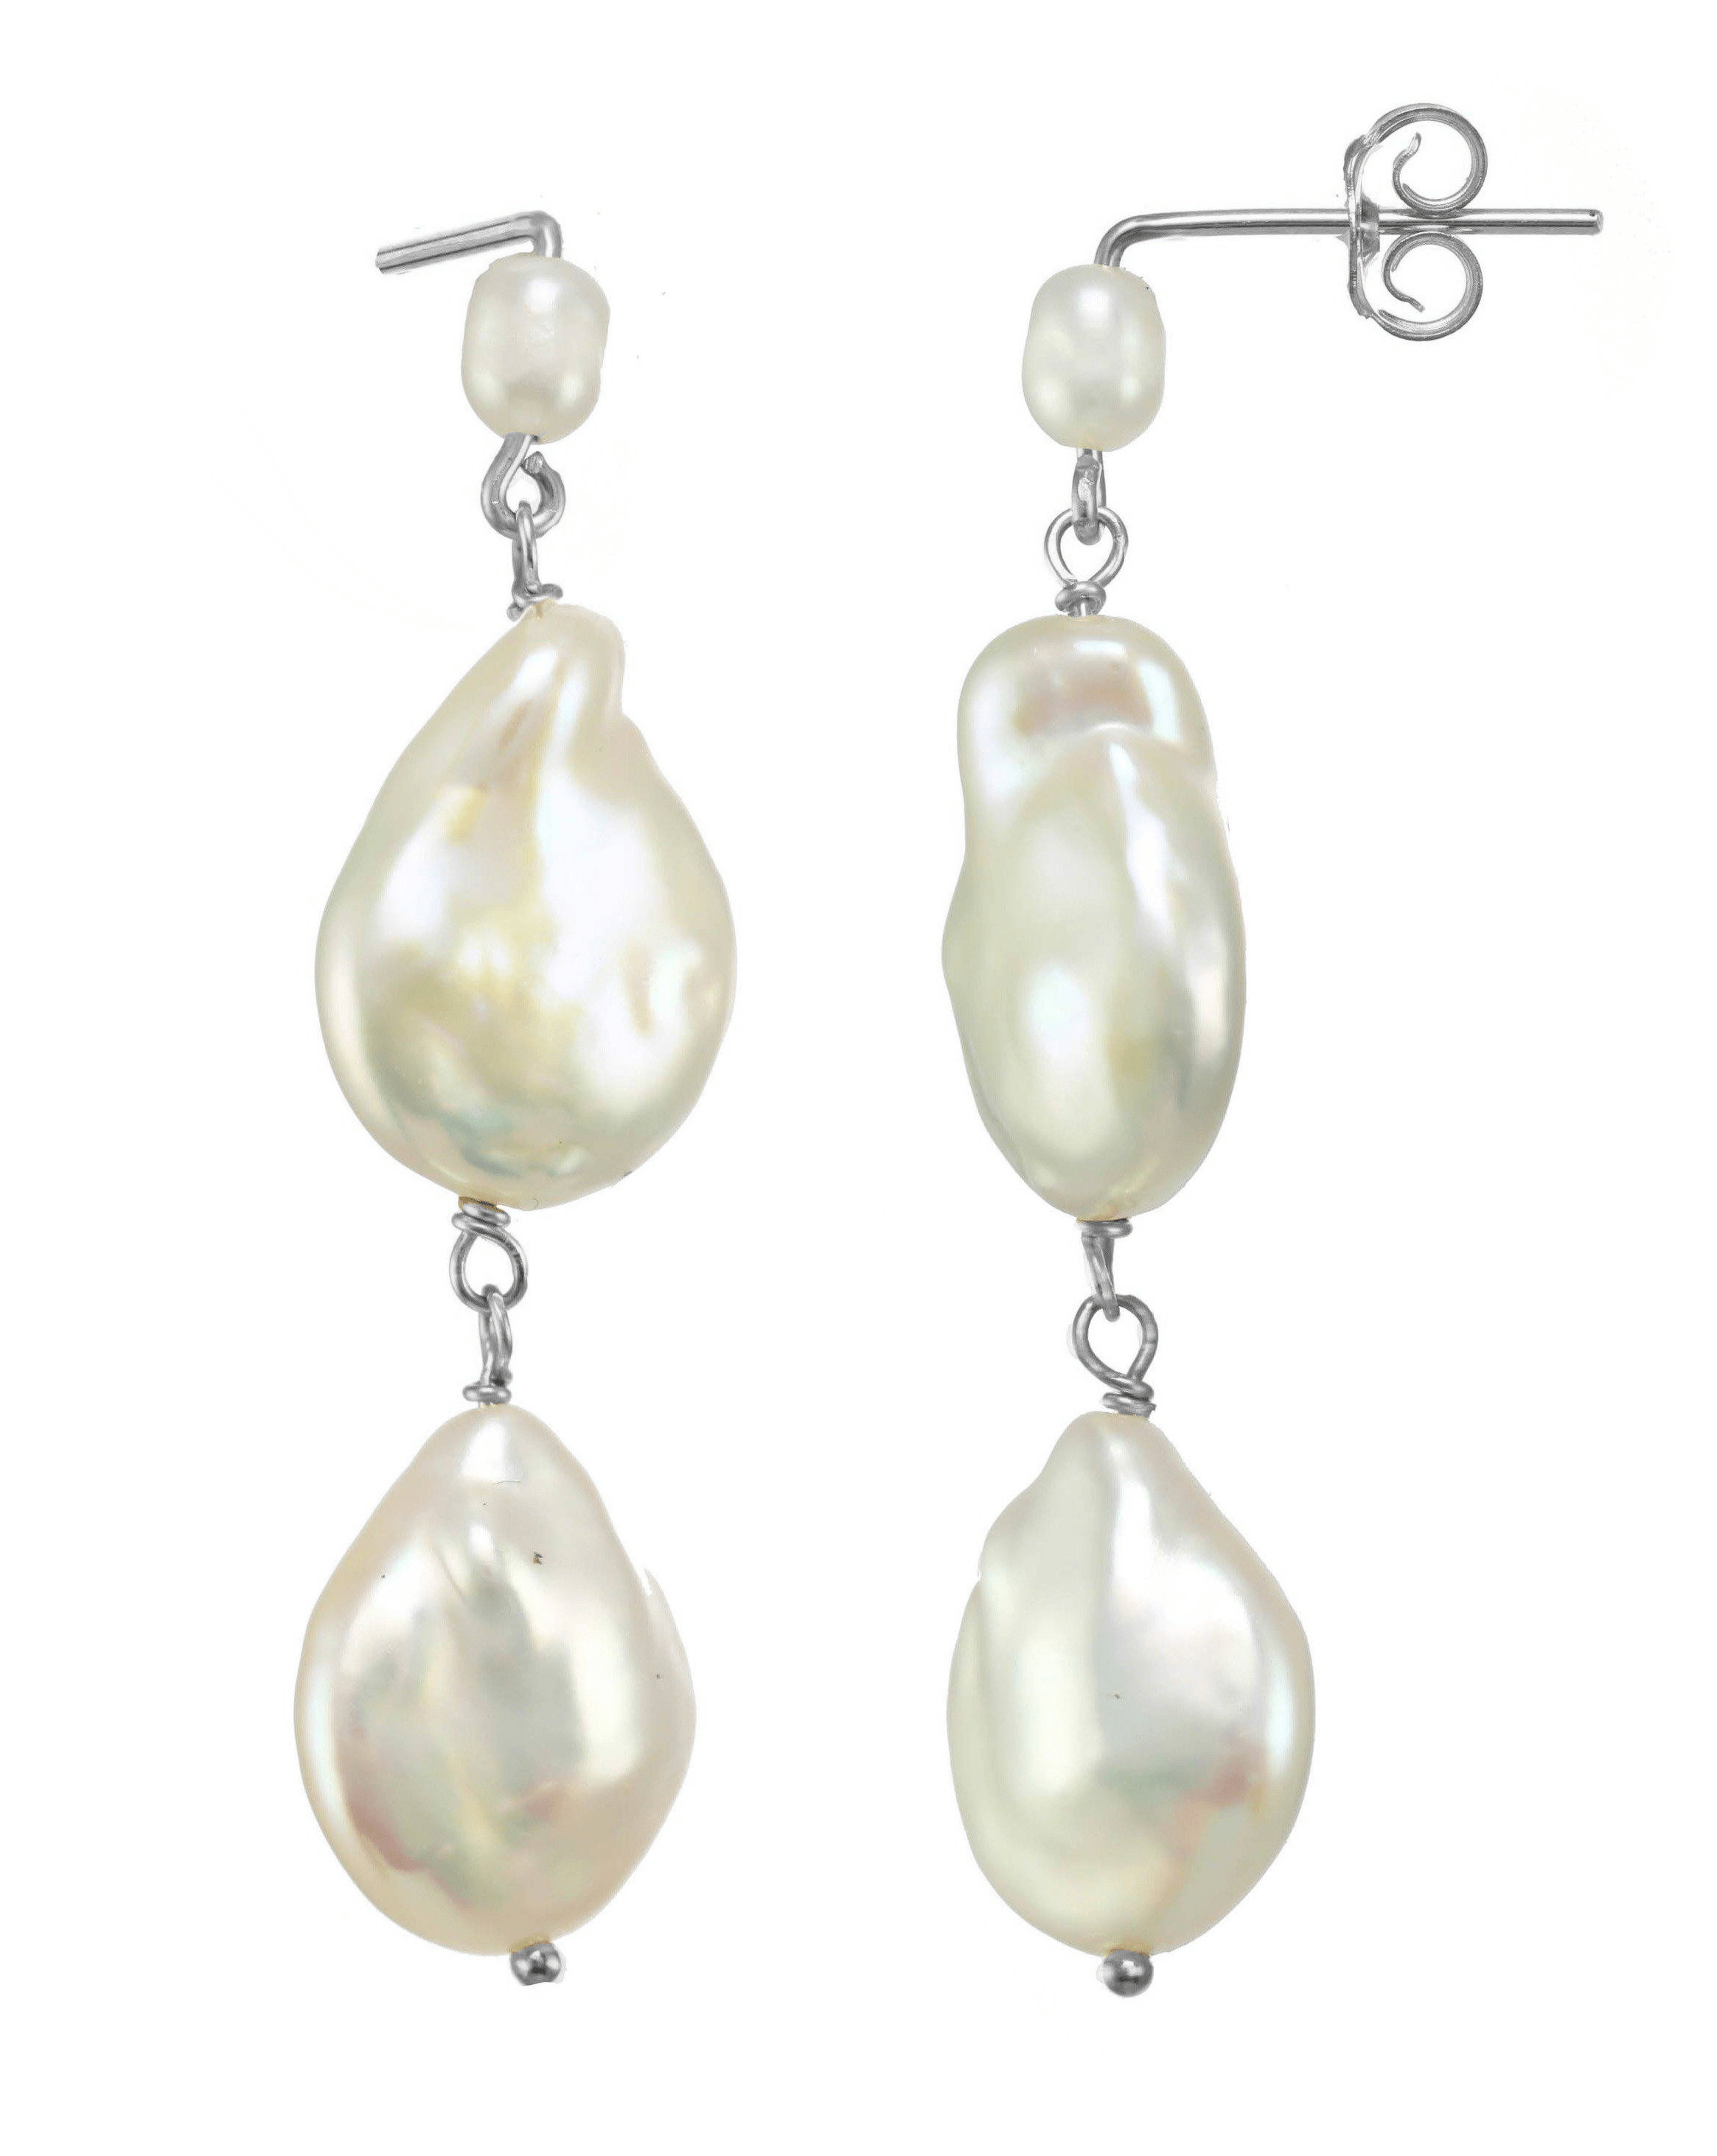 Caro Earrings by KOZAKH. Dangling earrings in Sterling Silver with an earring drop length of 2 inches, featuring Freshwater Baroque Pearls.